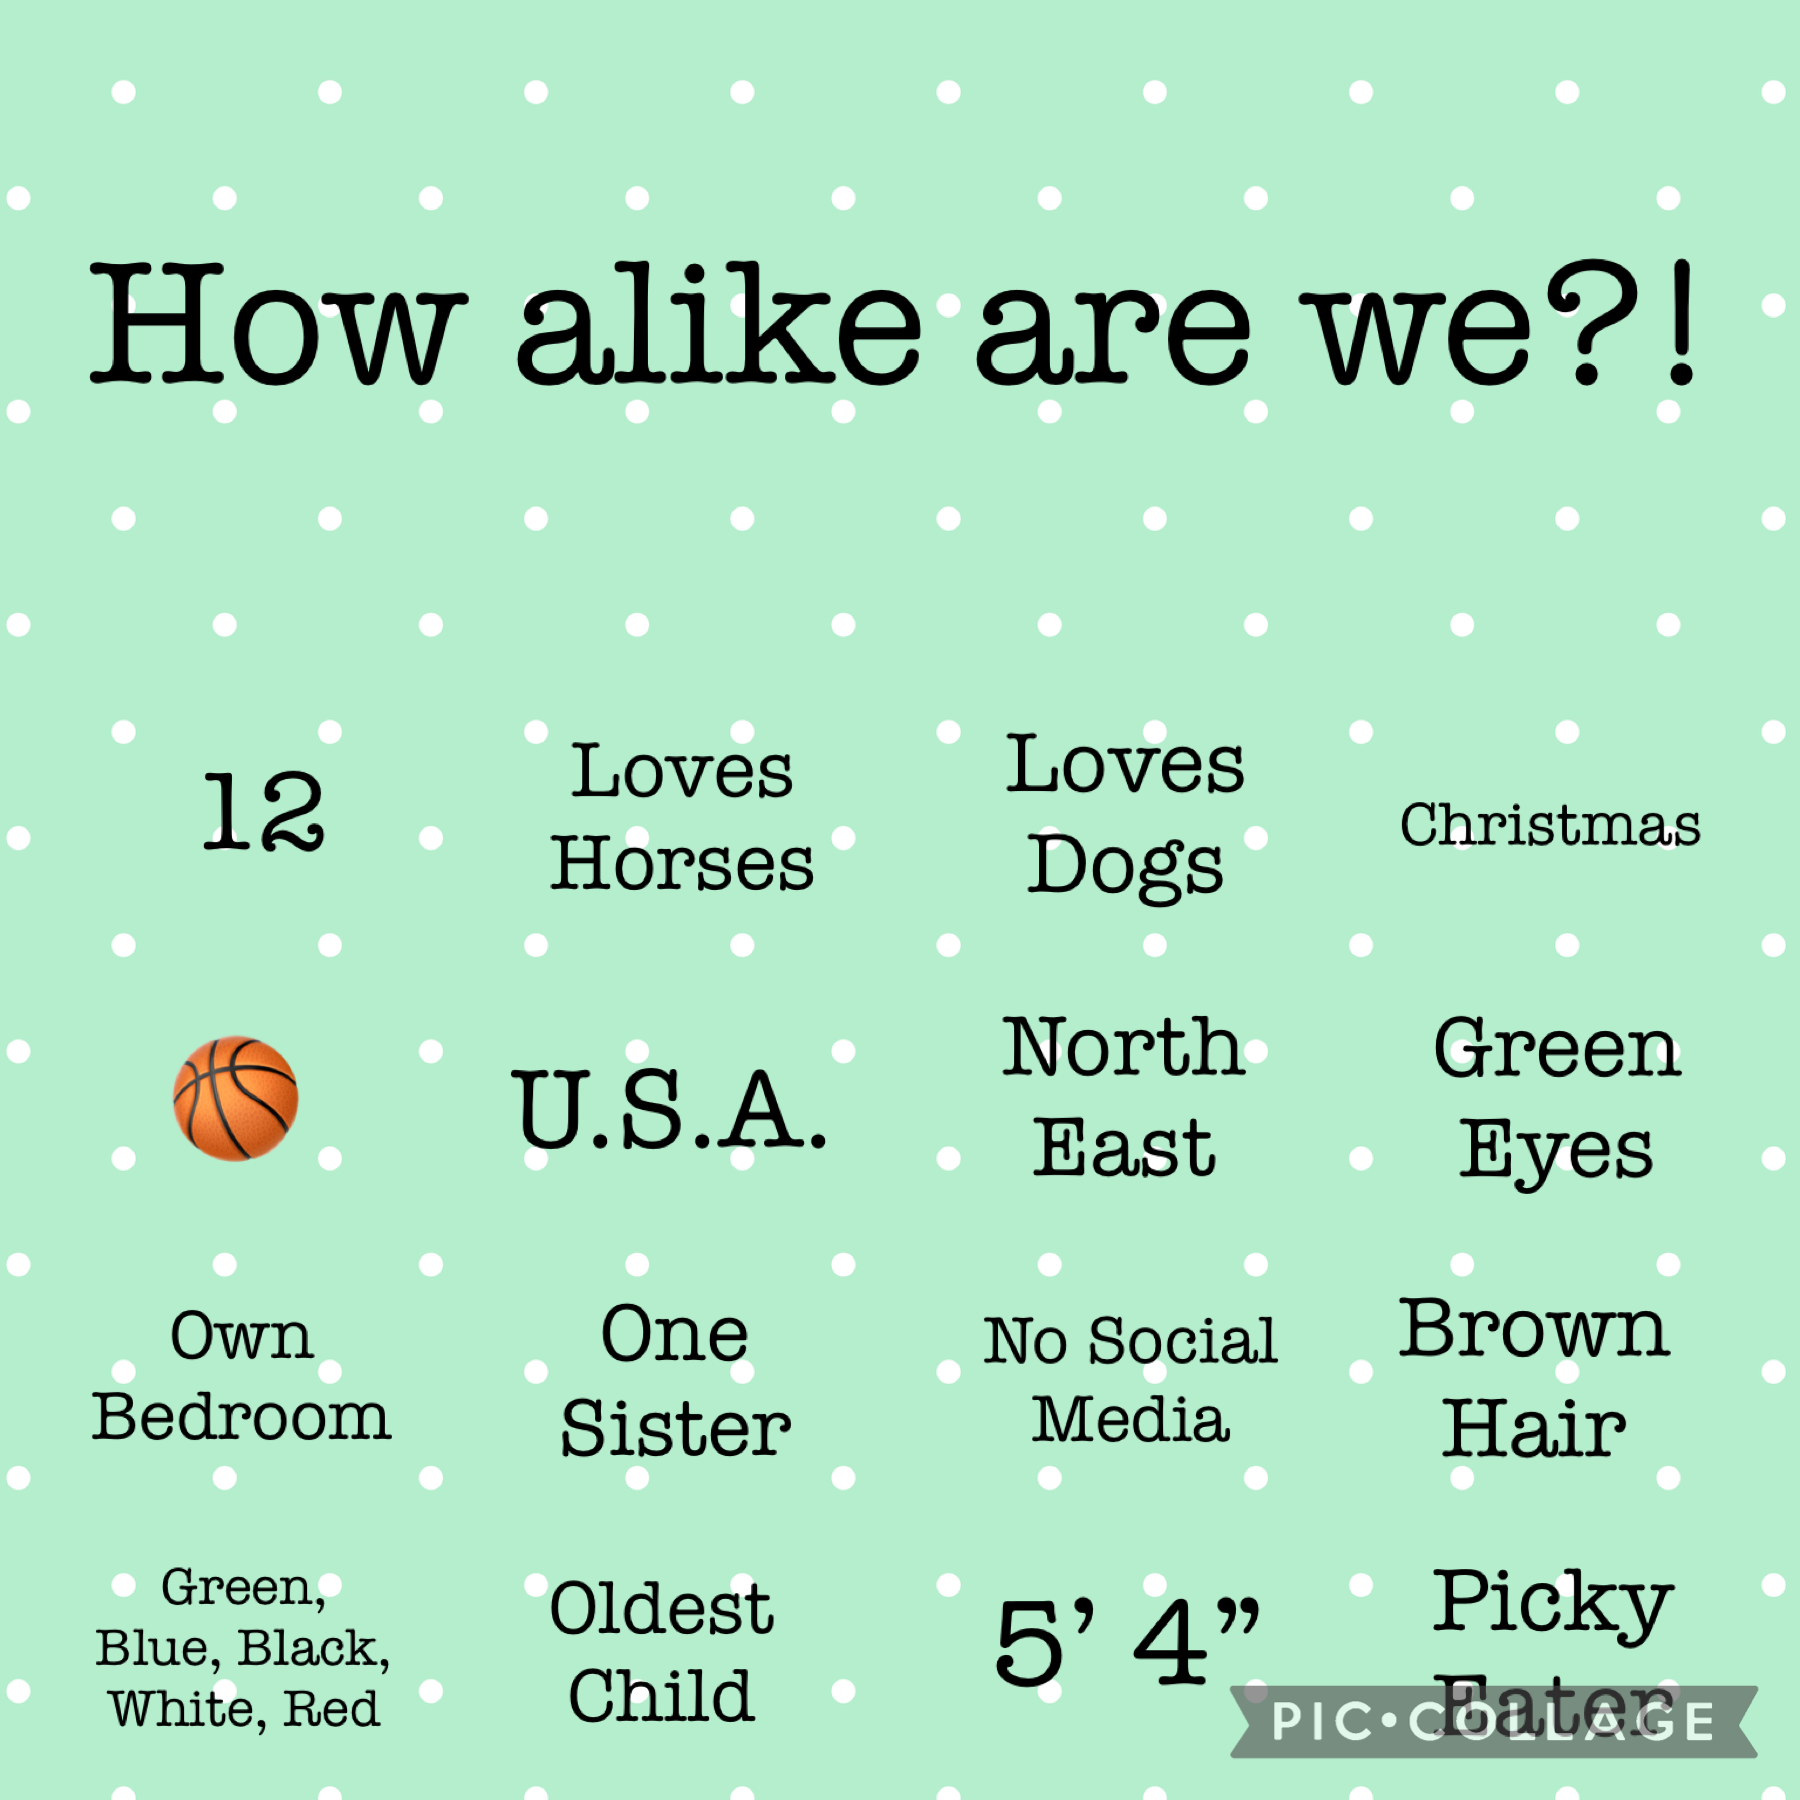 How Alike Are We? Please fill this out, I want to see who is most like me!!!